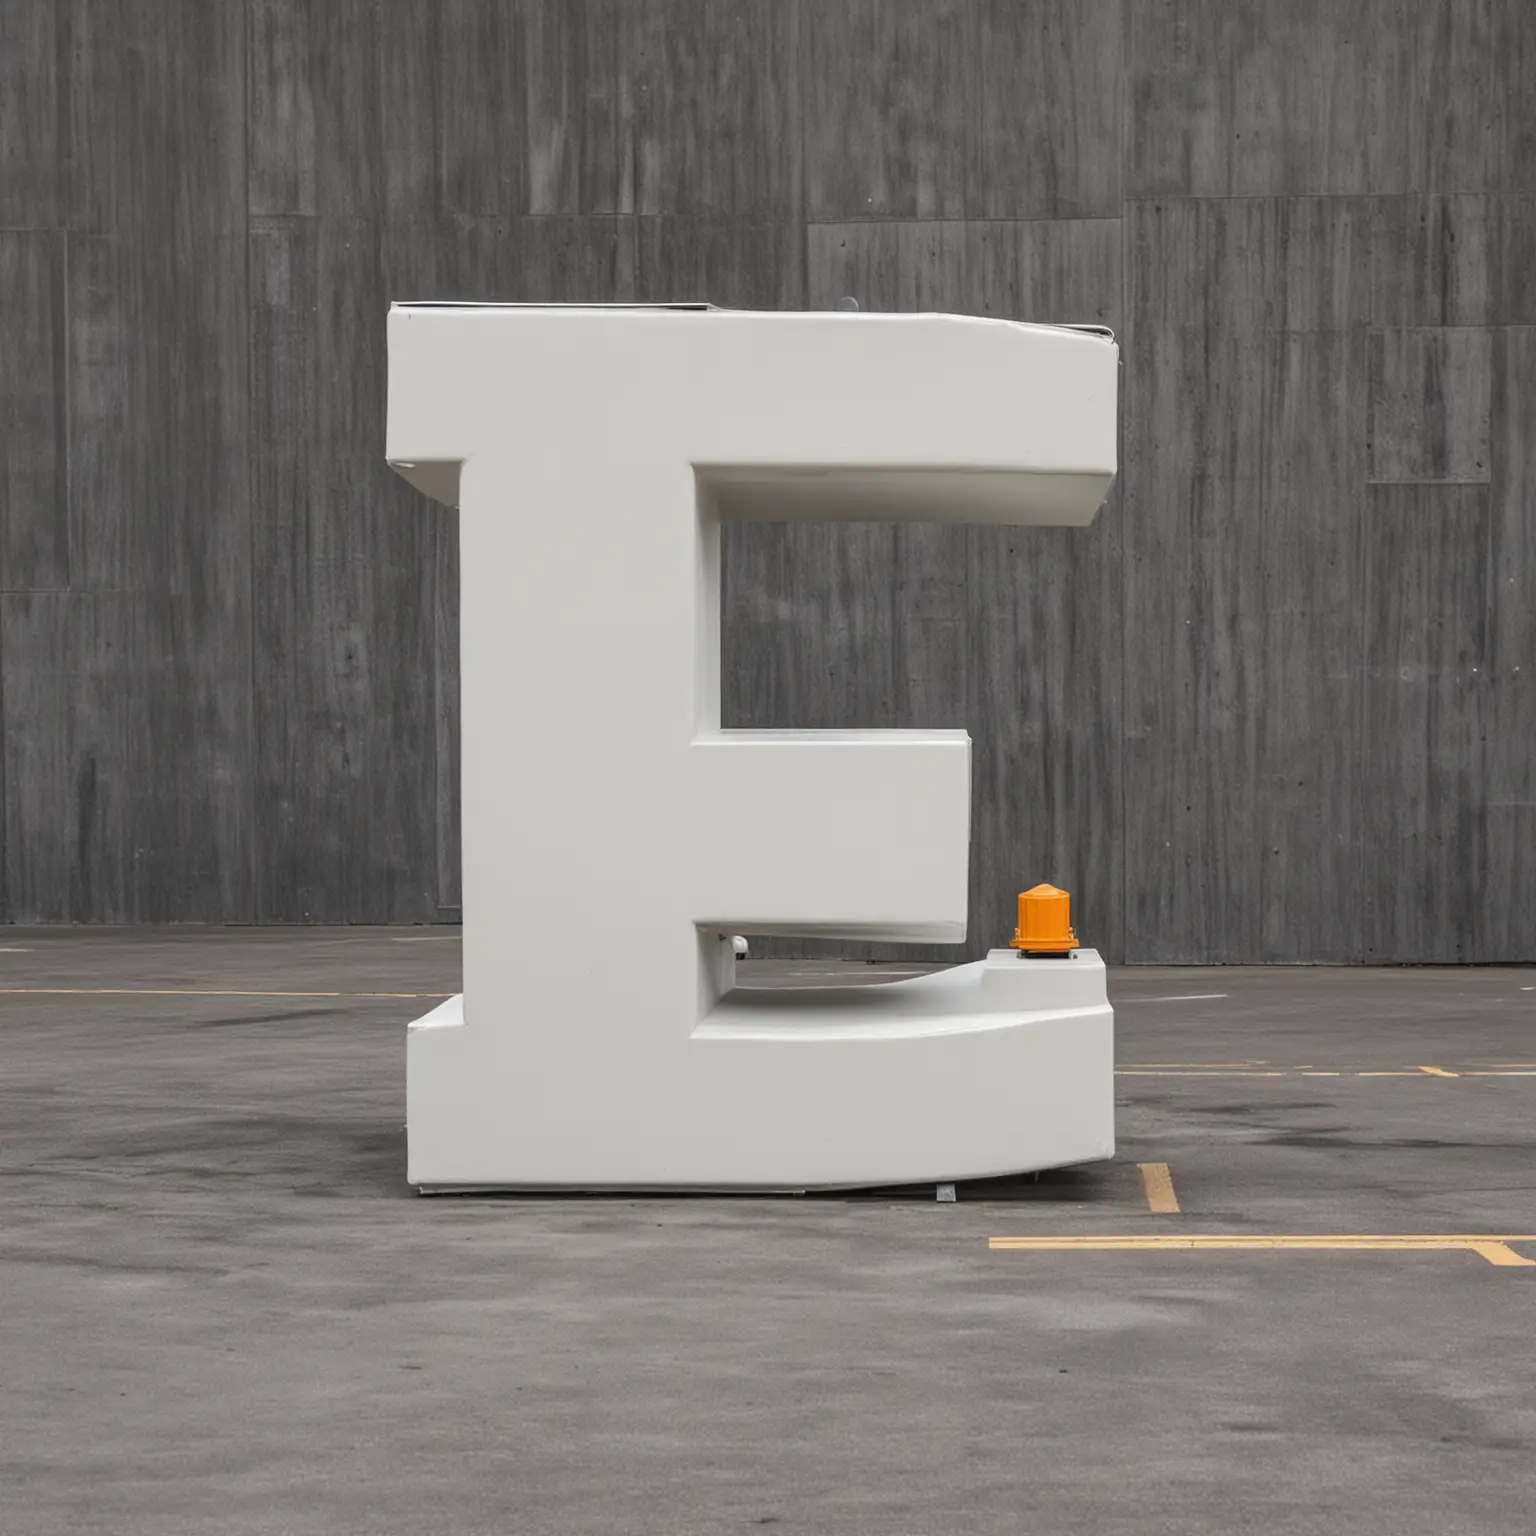 a big letter E in an indiustry

